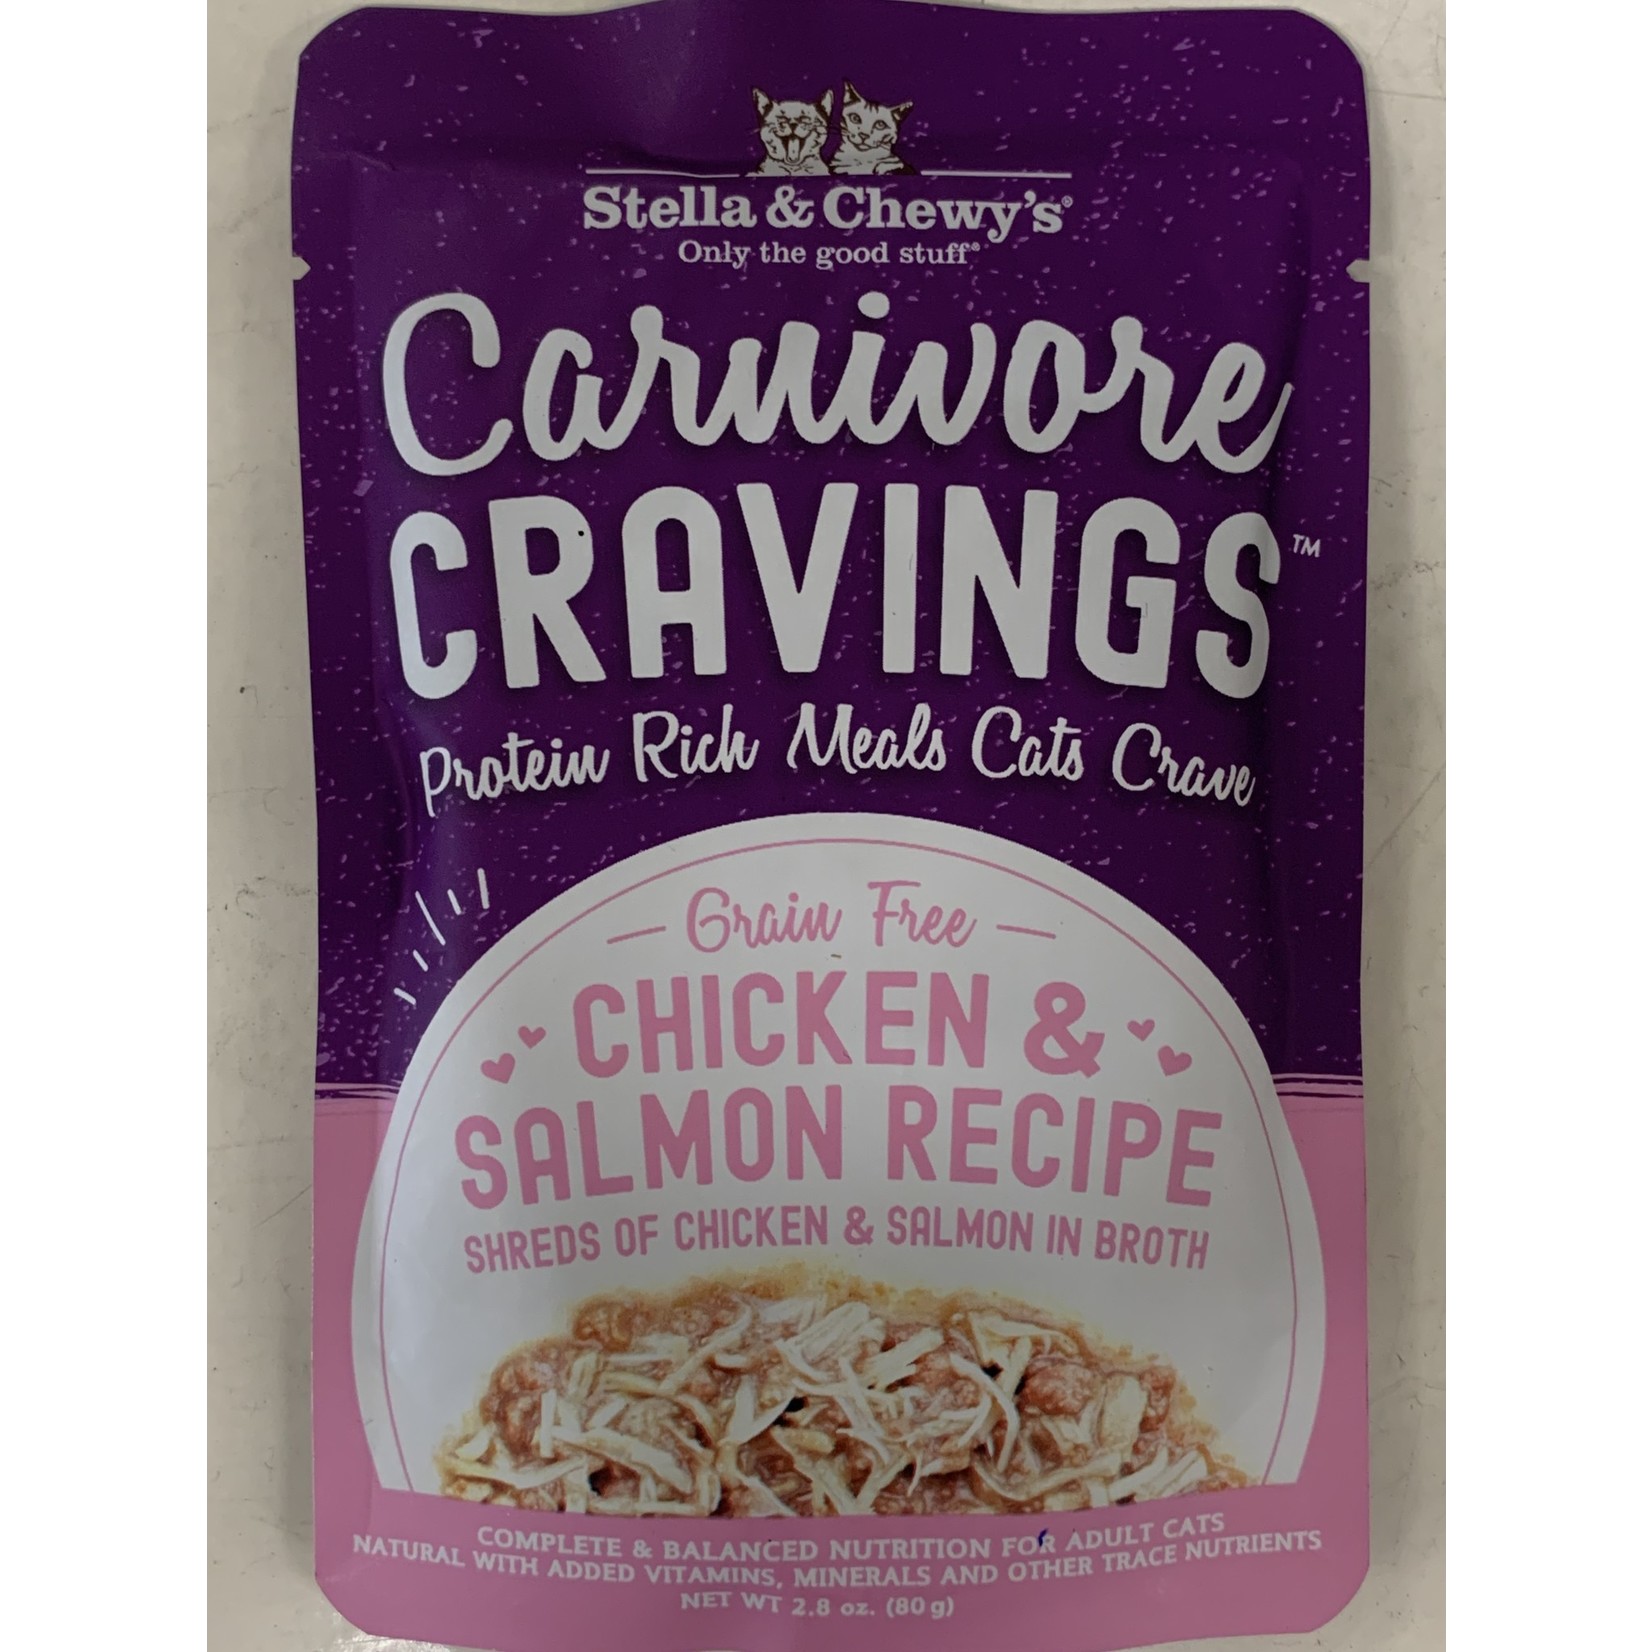 STELLA CHEWY CARNIVORE CRAVINGS CHICKEN/SALMON 2.8